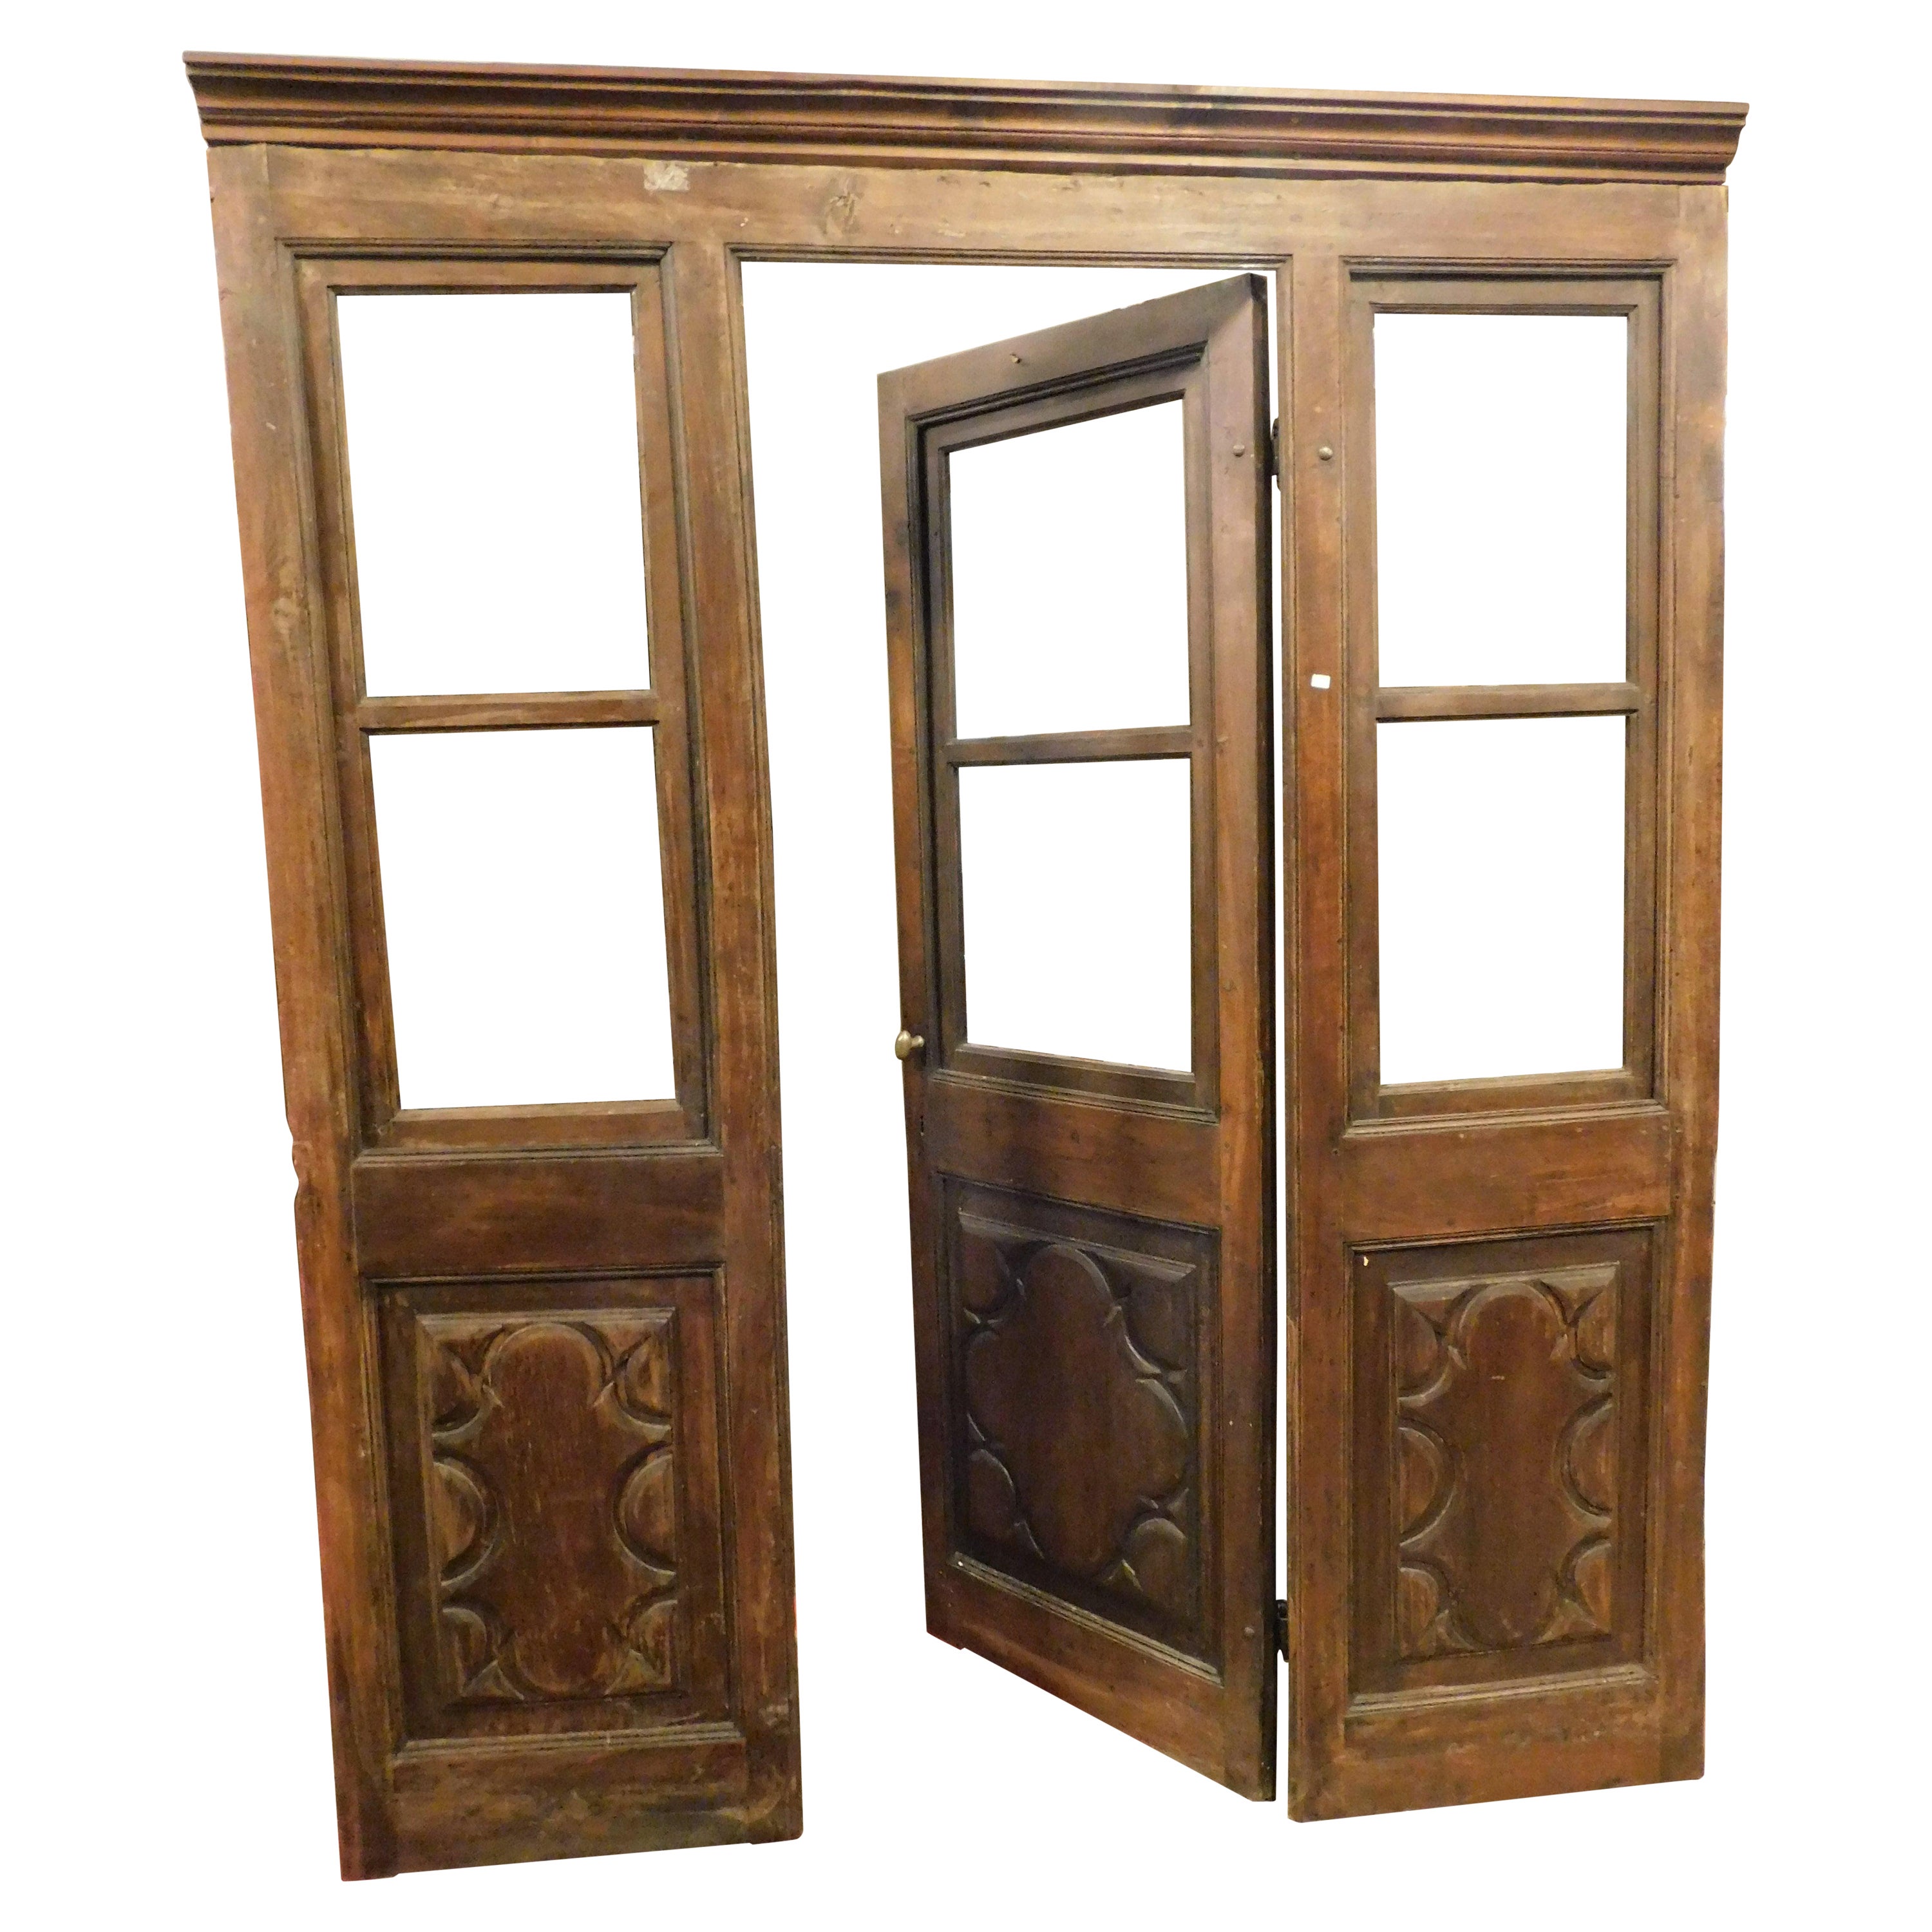 Glass entrance shop door with windows, carved walnut and complete frame, Italy